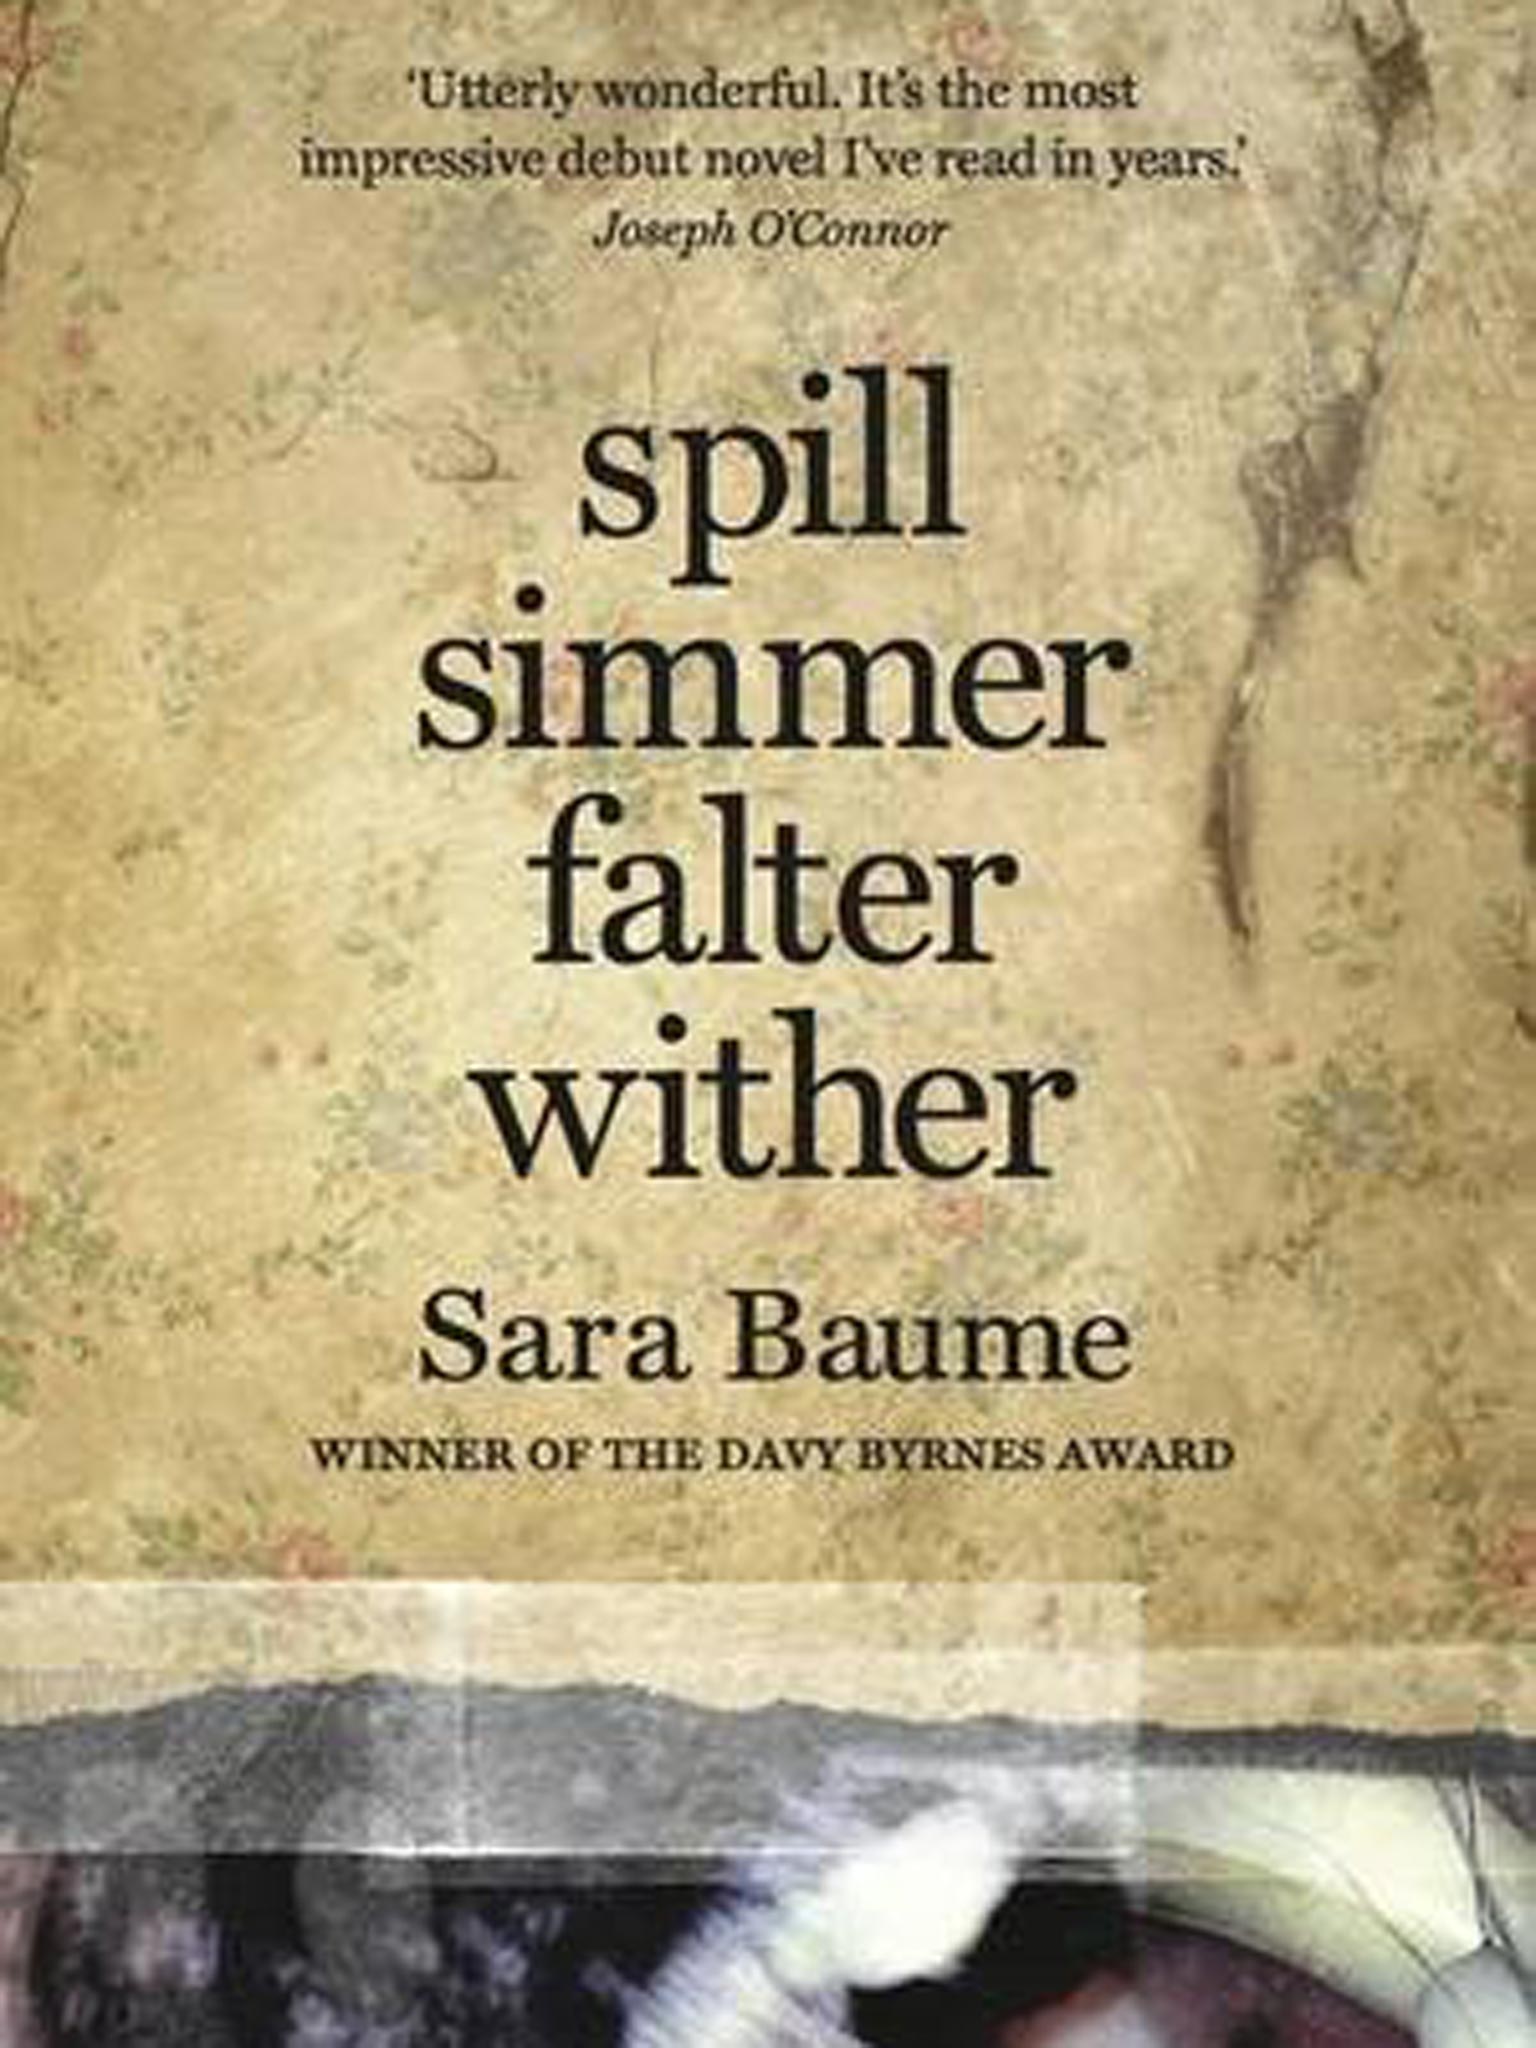 spill simmer falter wither by sara baume